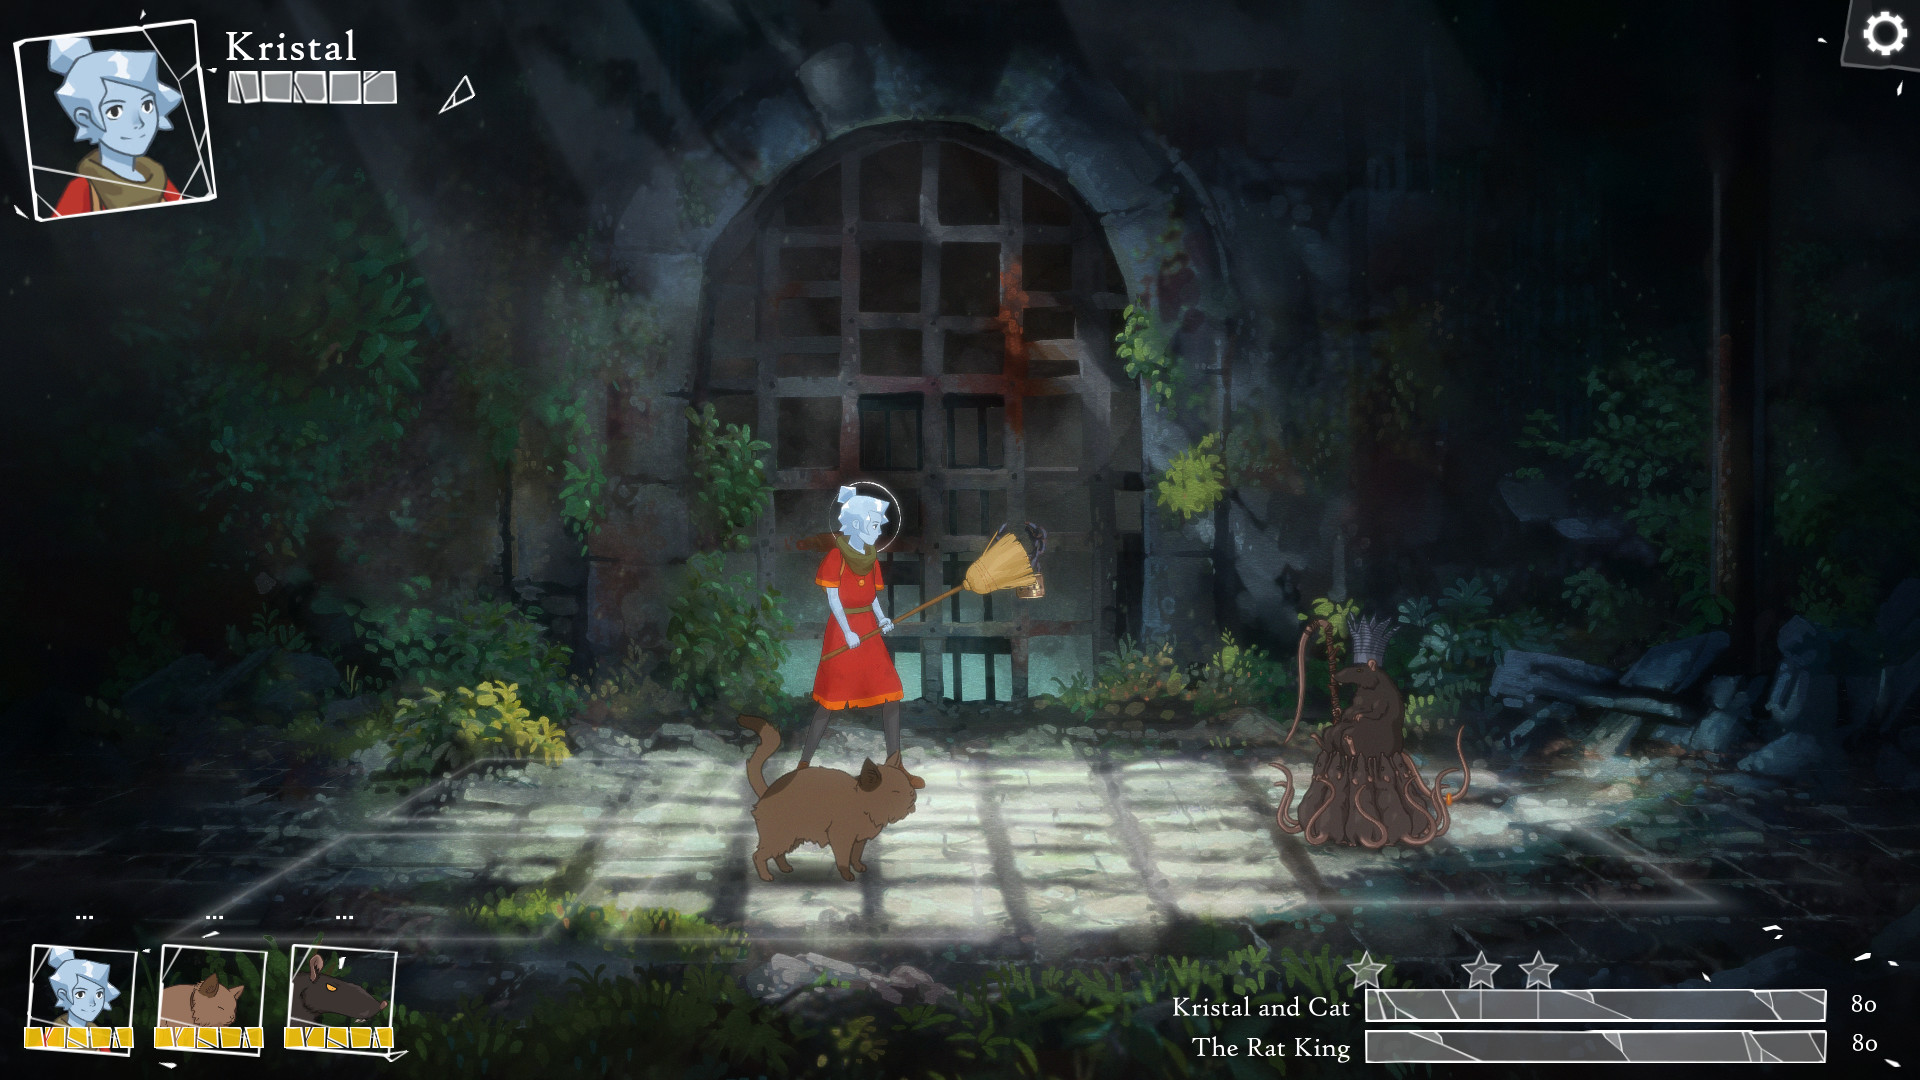 The Girl of Glass: A Summer Bird's Tale Free Download for PC